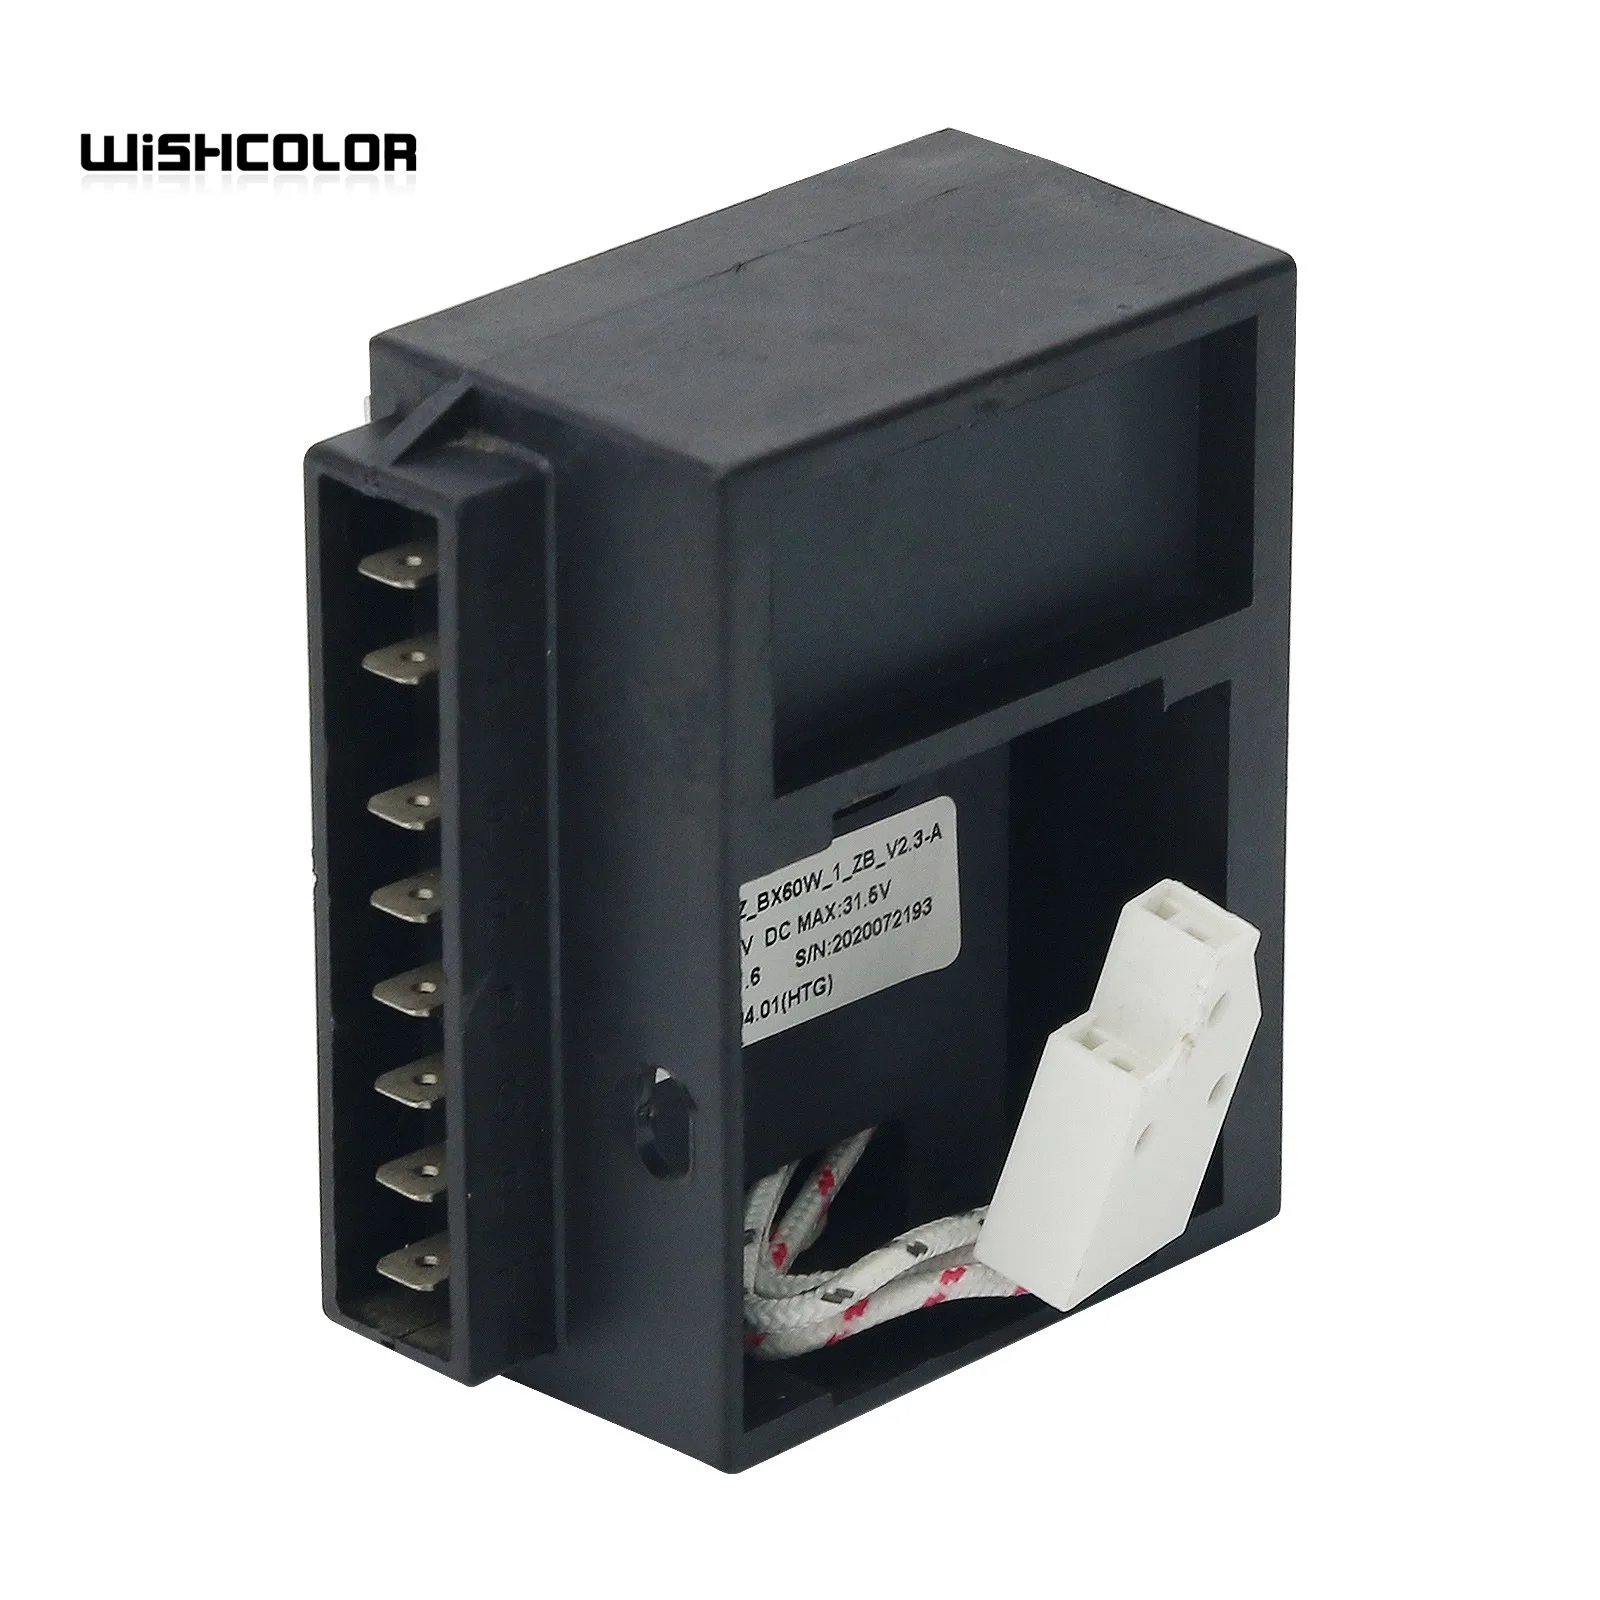 

Wishcolor ZY-CC60DC12/24V-B5 Vehicle Refrigerator Variable Frequency Compressor Driver Second-Hand Module